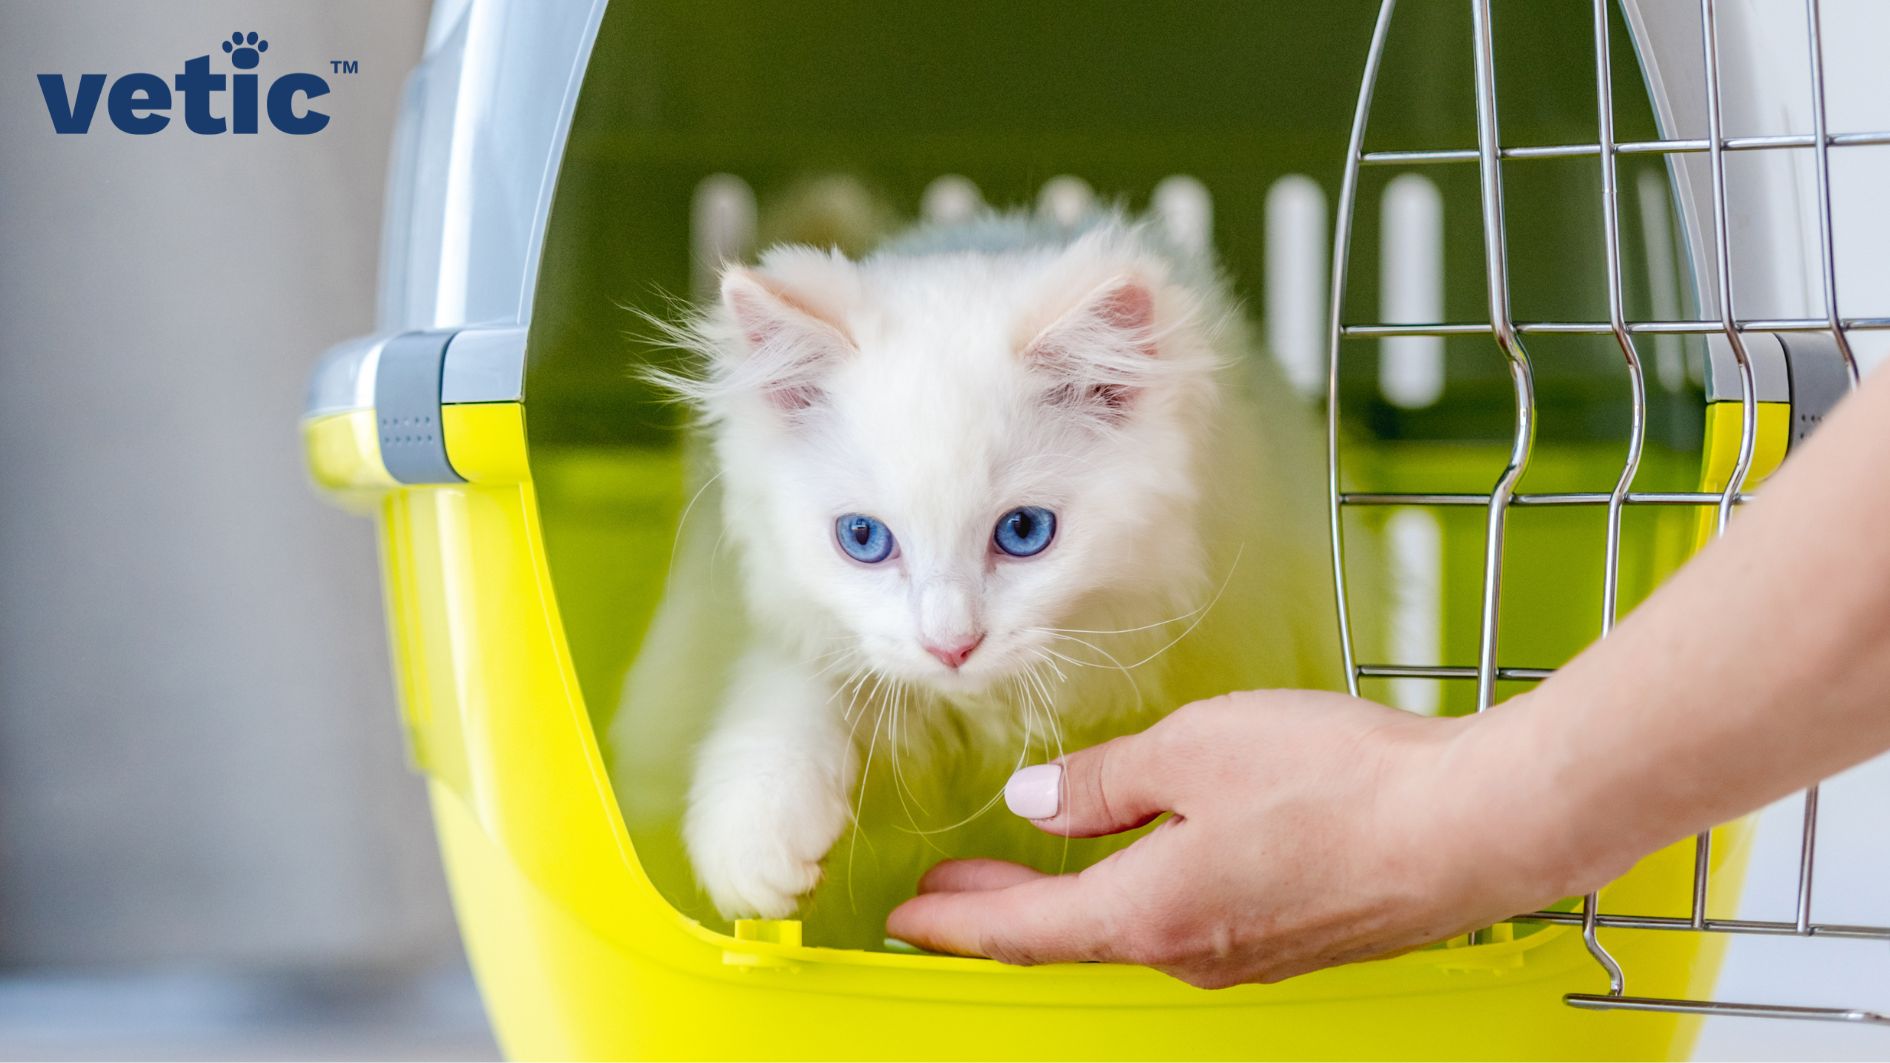 White Persian cat with light blue eyes sniffing a hand placed outside their carrier. it is a front open carrier with a lemon yellow base and grey top.